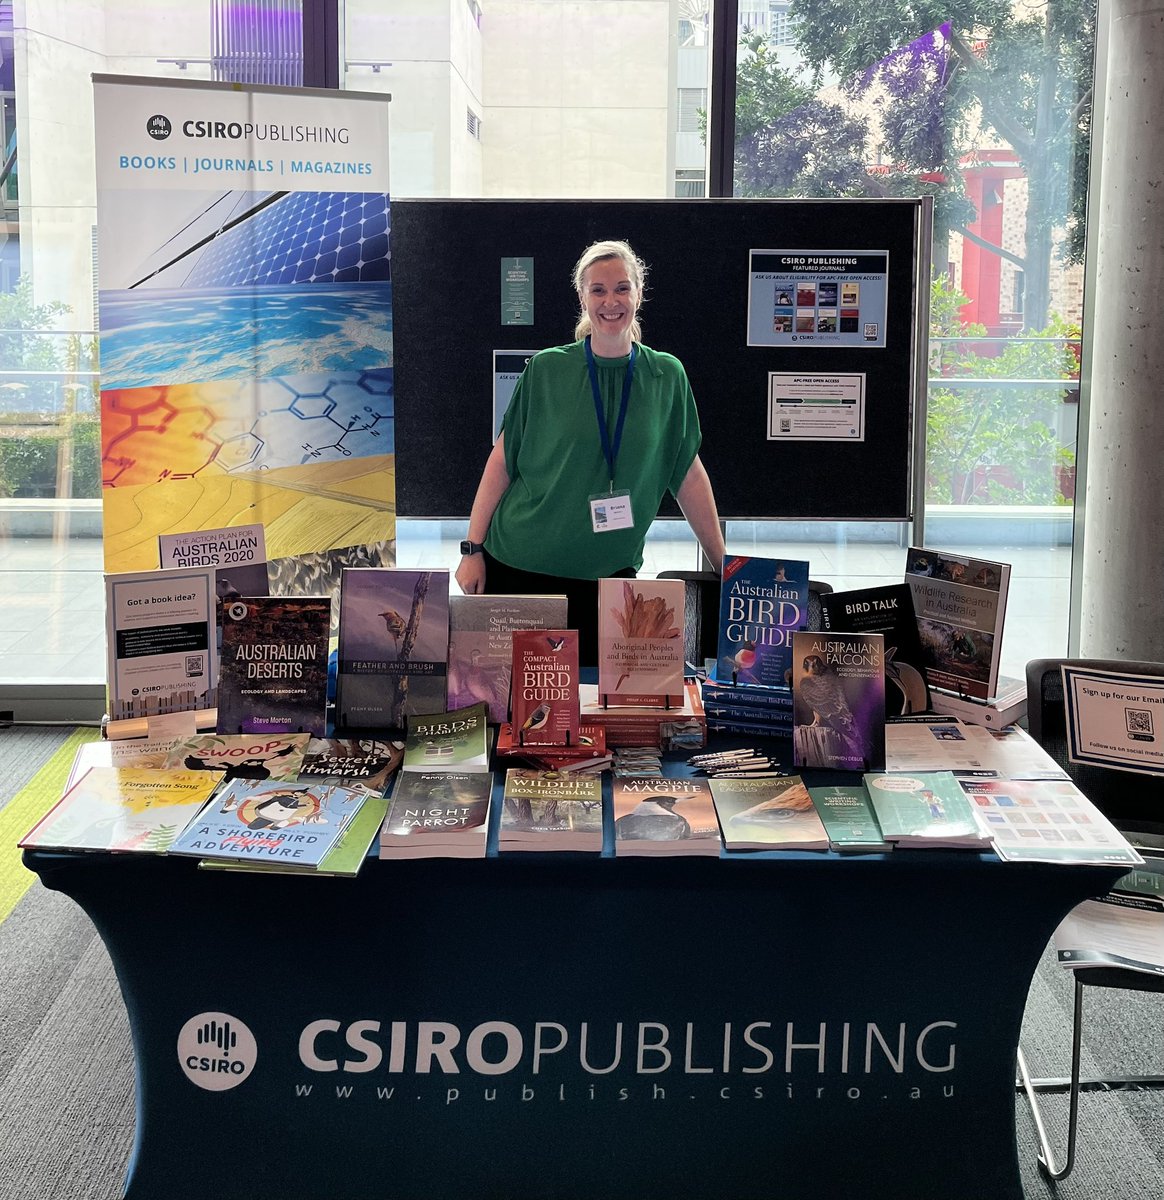 Delighted to be at #AOC2023 - come past our booth and say ‘hi’! @CSIROPublishing